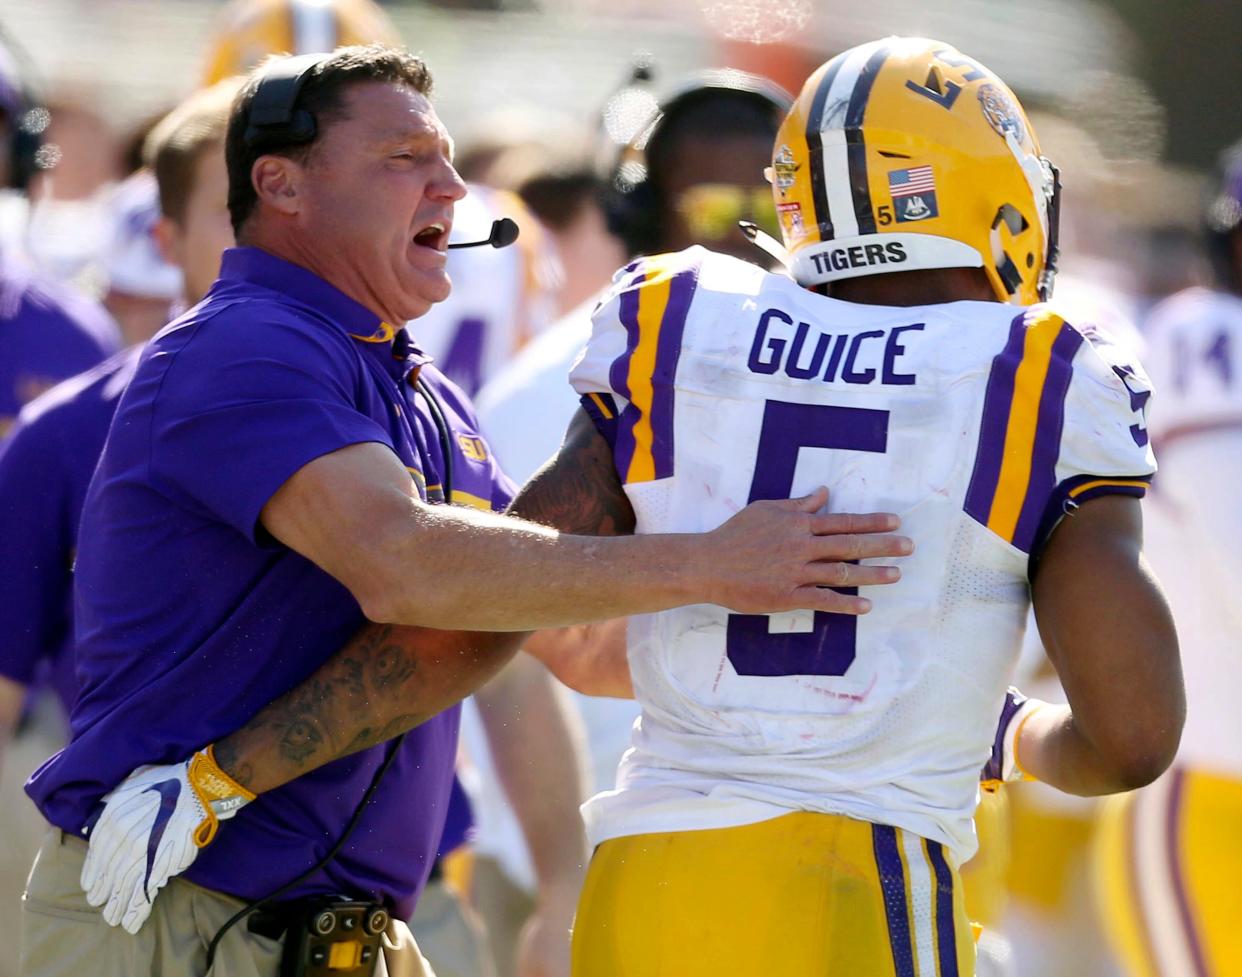 LSU head coach Ed Orgeron celebrates with running back Derrius Guice (5) after a touchdown against Louisville during the first half of the Citrus Bowl NCAA football game, Saturday, Dec. 31, 2016, in Orlando, Fla. (Stephen M. Dowell/Orlando Sentinel via AP)